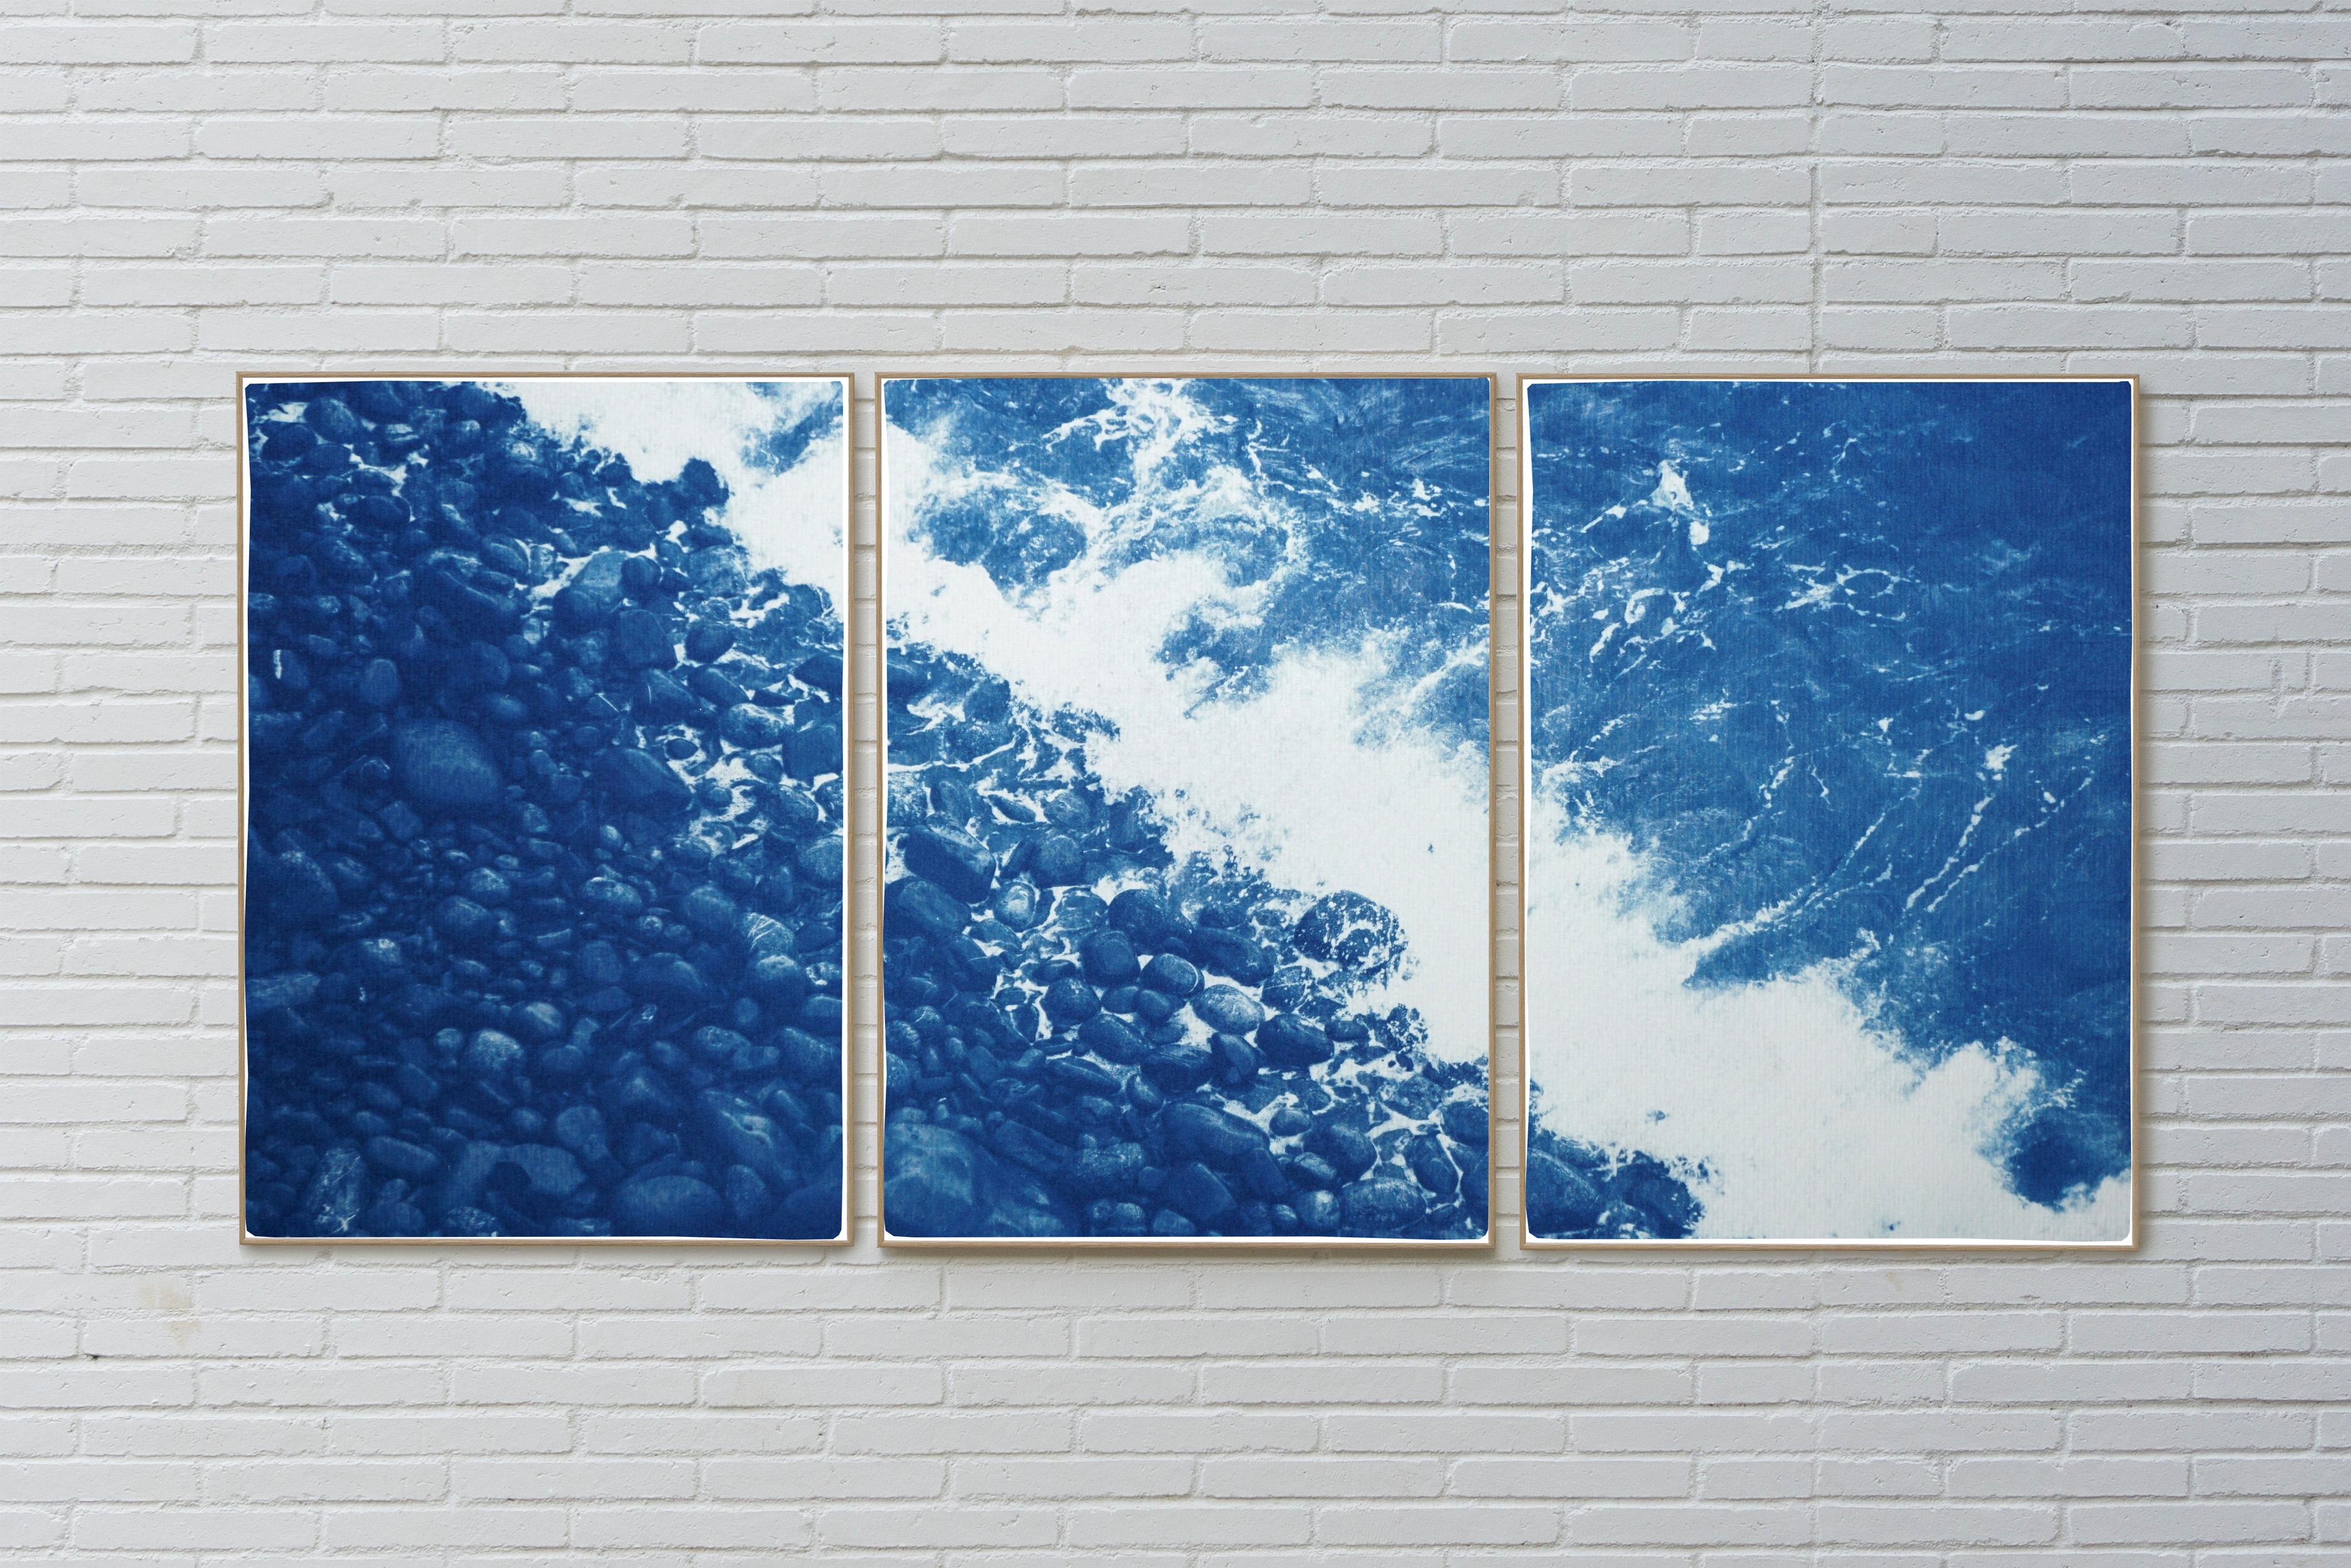 Nautical Triptych Blue British Pebble Beach Handmade Cyanotype, Watercolor Paper - Photograph by Kind of Cyan